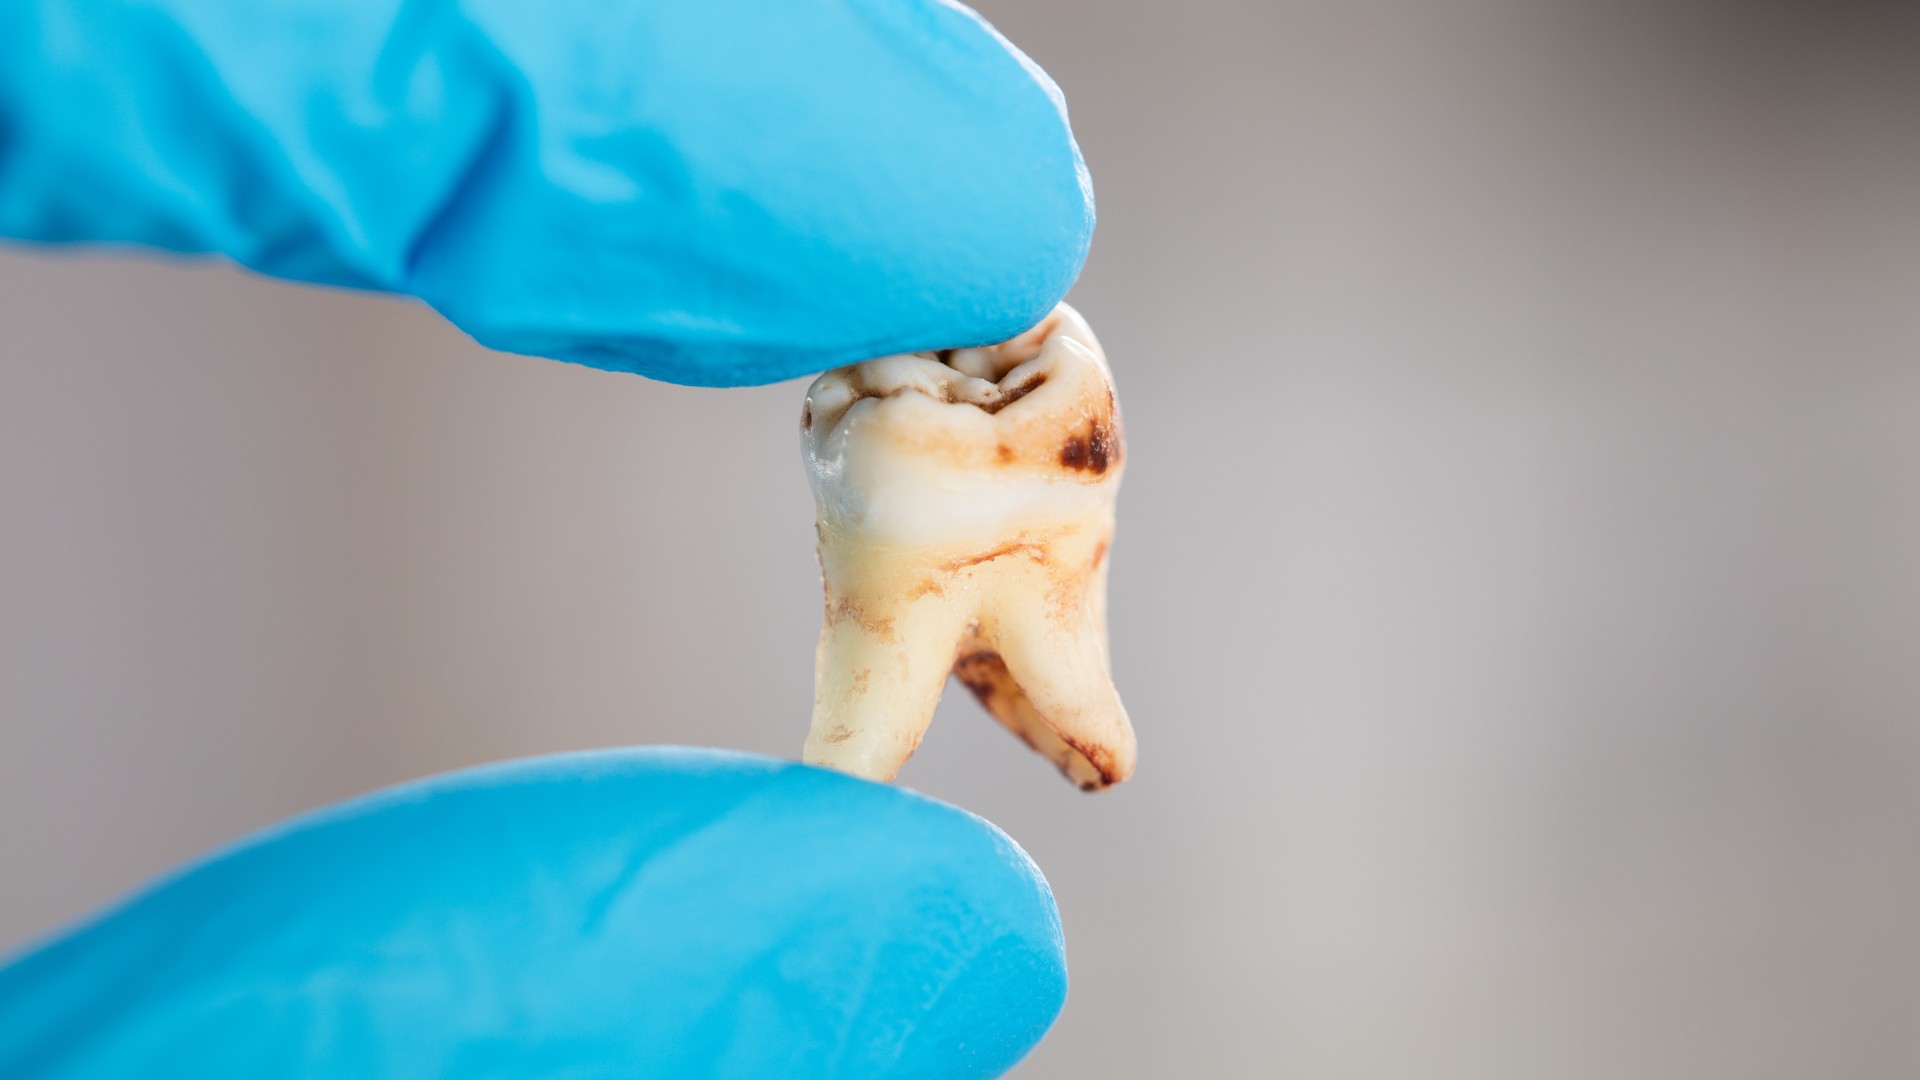 Close up of dentist hand in glove holding a decaying tooth (example of tooth decay).